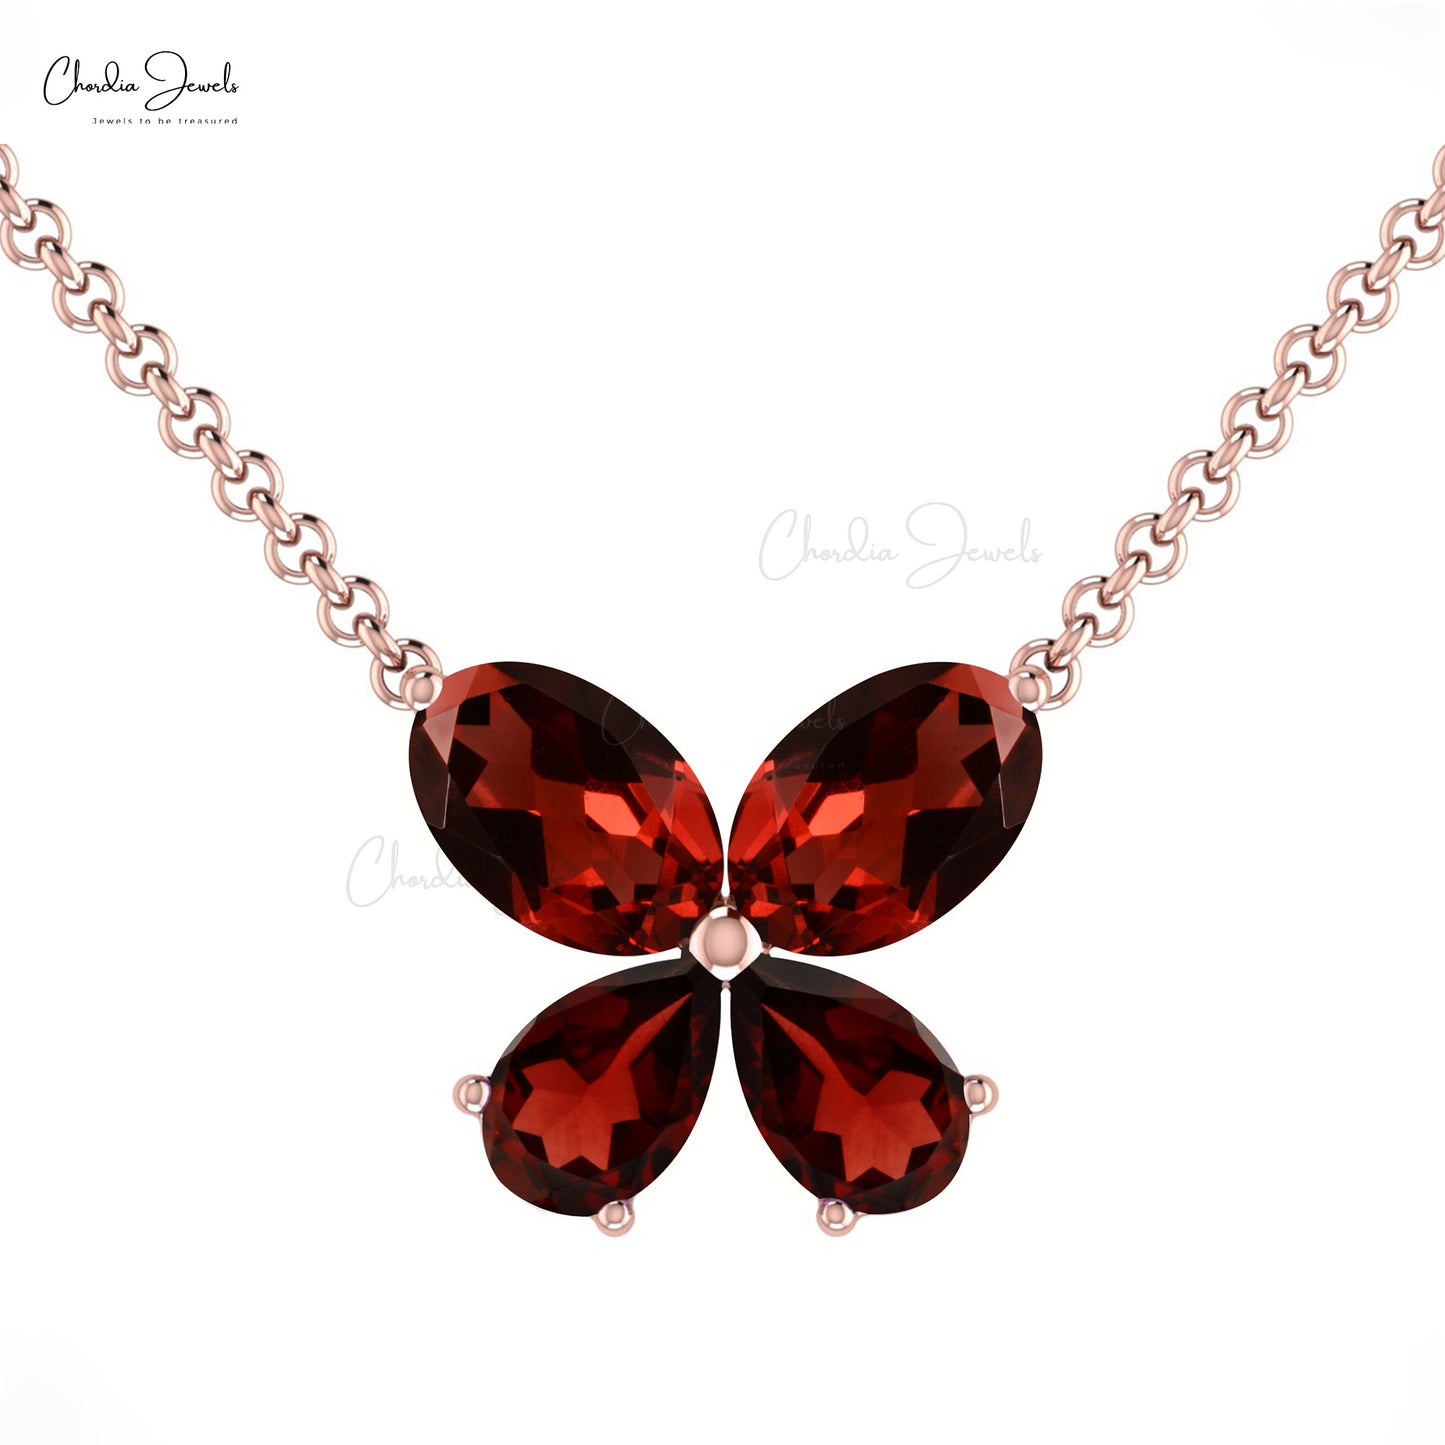 Load image into Gallery viewer, Customized Elegant Natural Garnet Butterfly Necklace Pendant Oval Shape 4-Stone Necklace in 14k Solid Gold Valentine Day Gift For Love Ones
